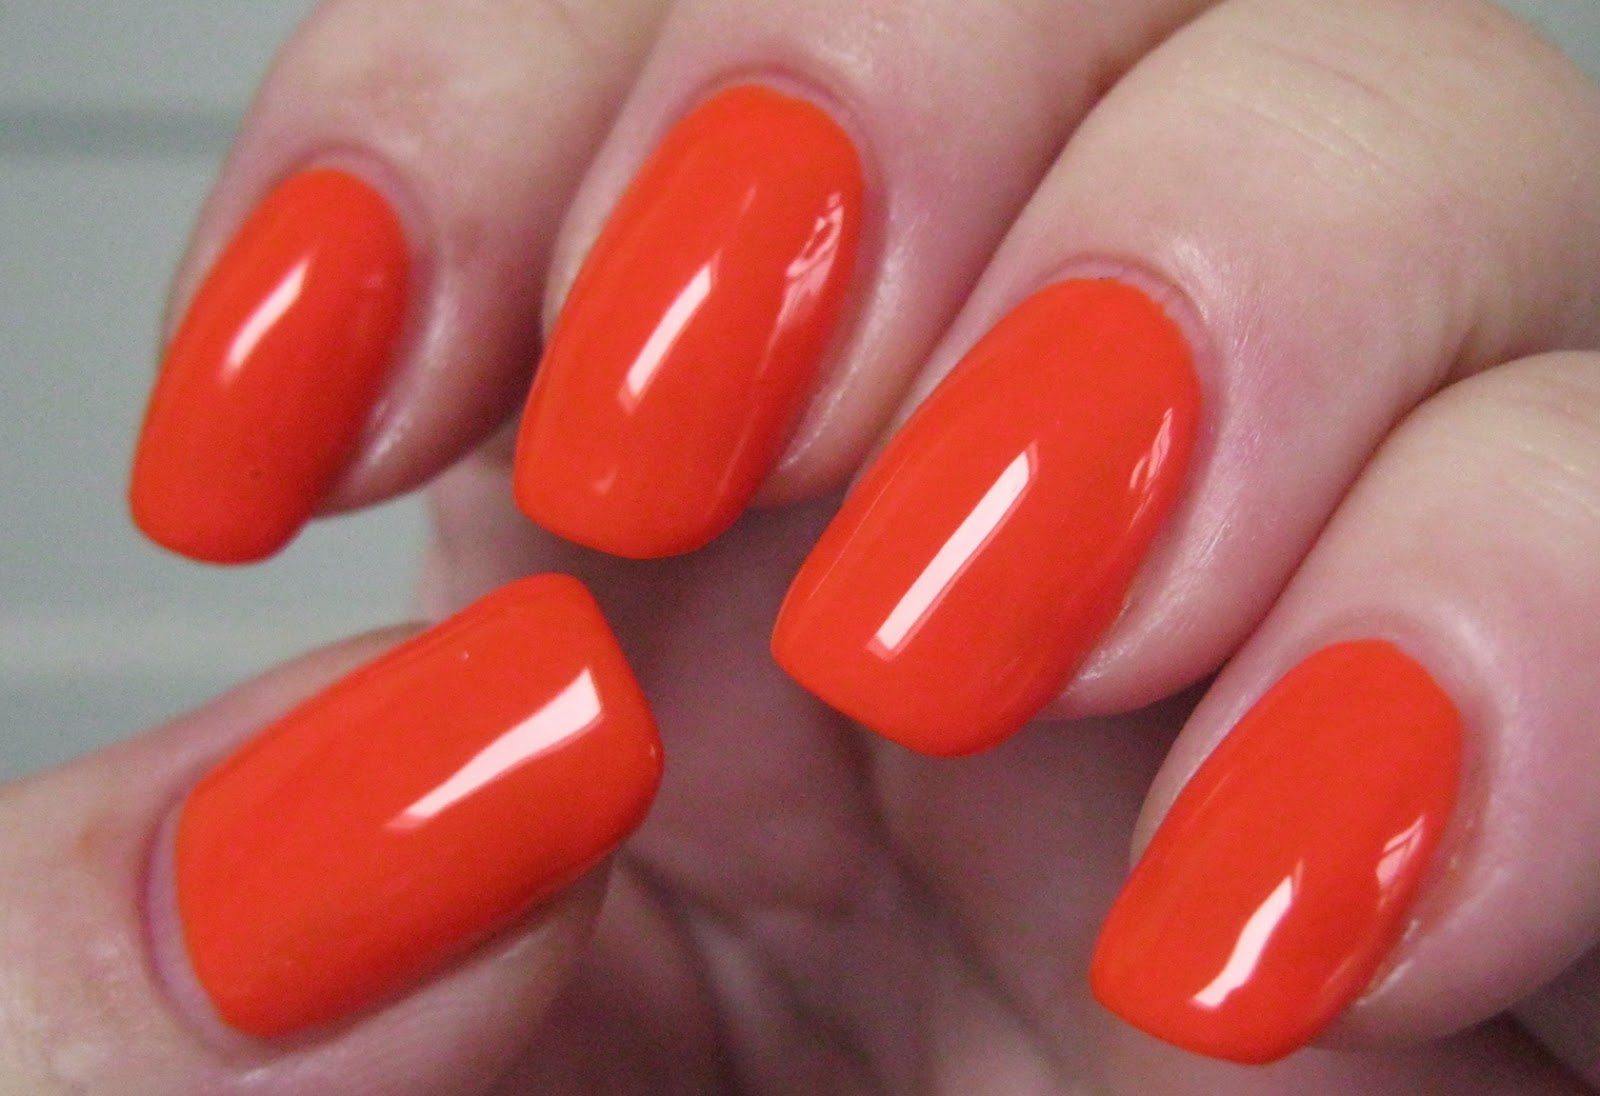 10. Orly Nail Lacquer in "Orange Punch" - wide 5